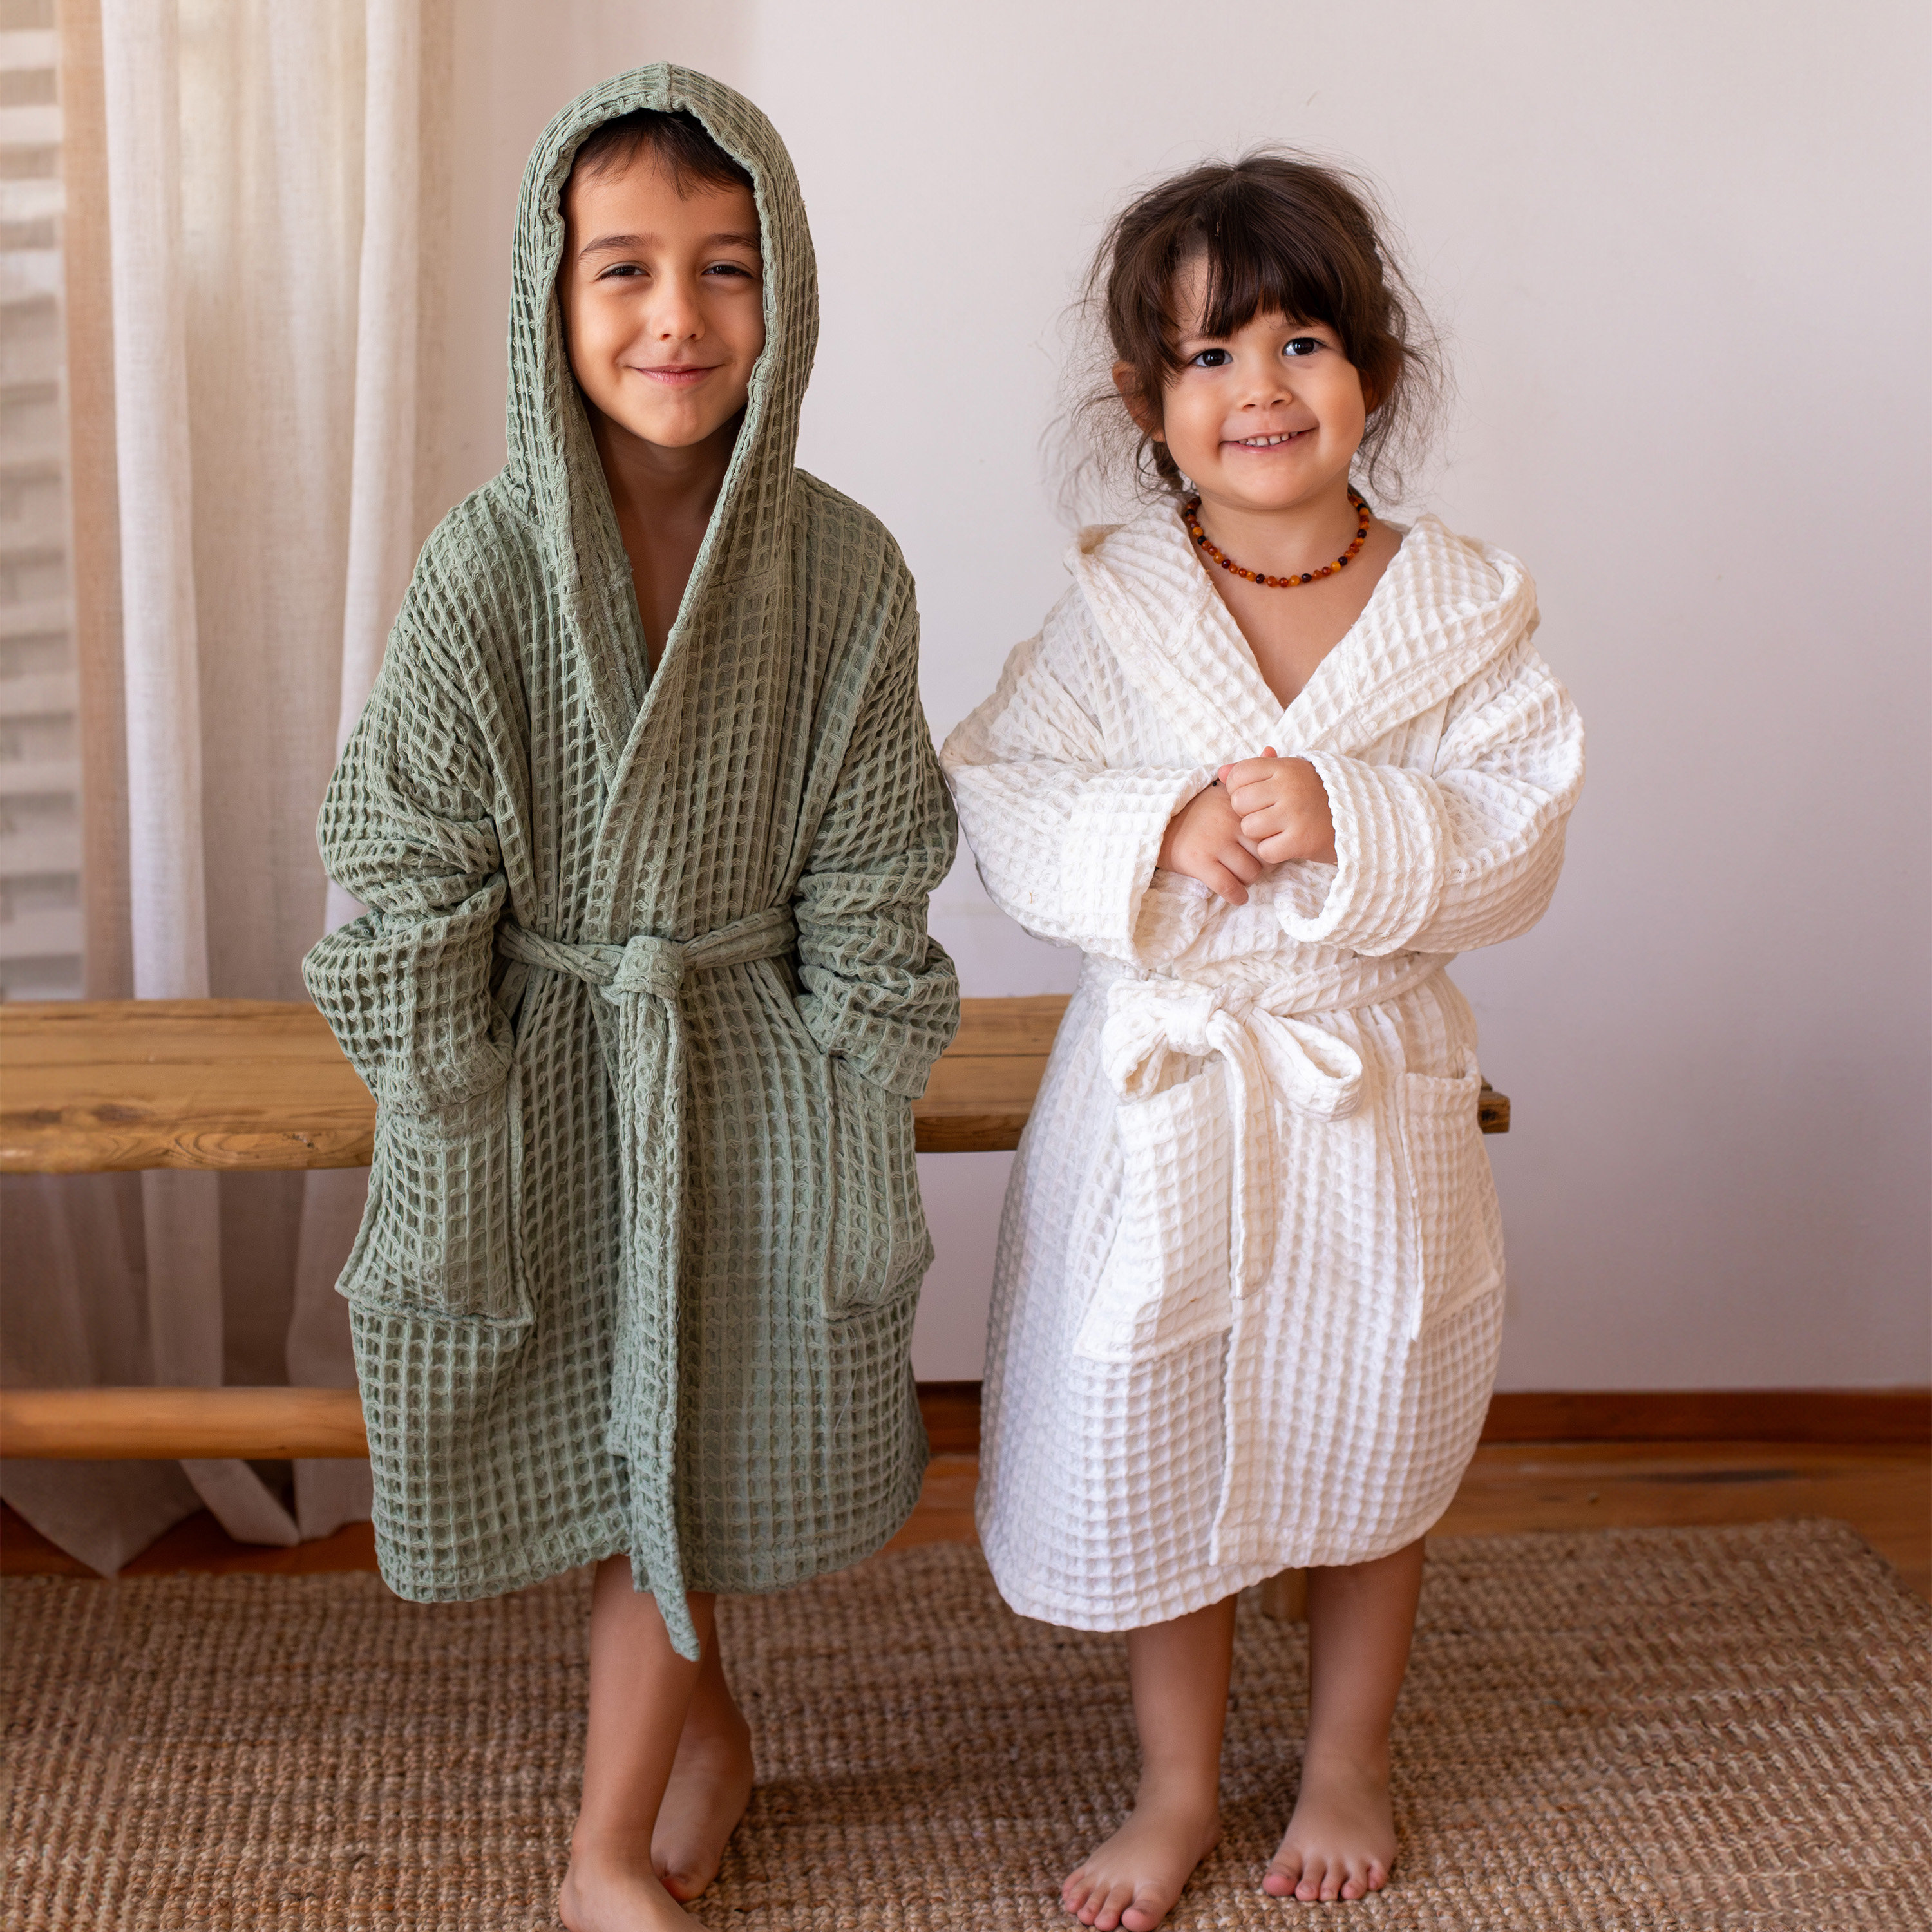 Kids Robes :: Terry Kids Robes :: 100% Turkish Cotton Turquoise Blue Hooded  Terry Kid's Bathrobe - Wholesale bathrobes, Spa robes, Kids robes, Cotton  robes, Spa Slippers, Wholesale Towels